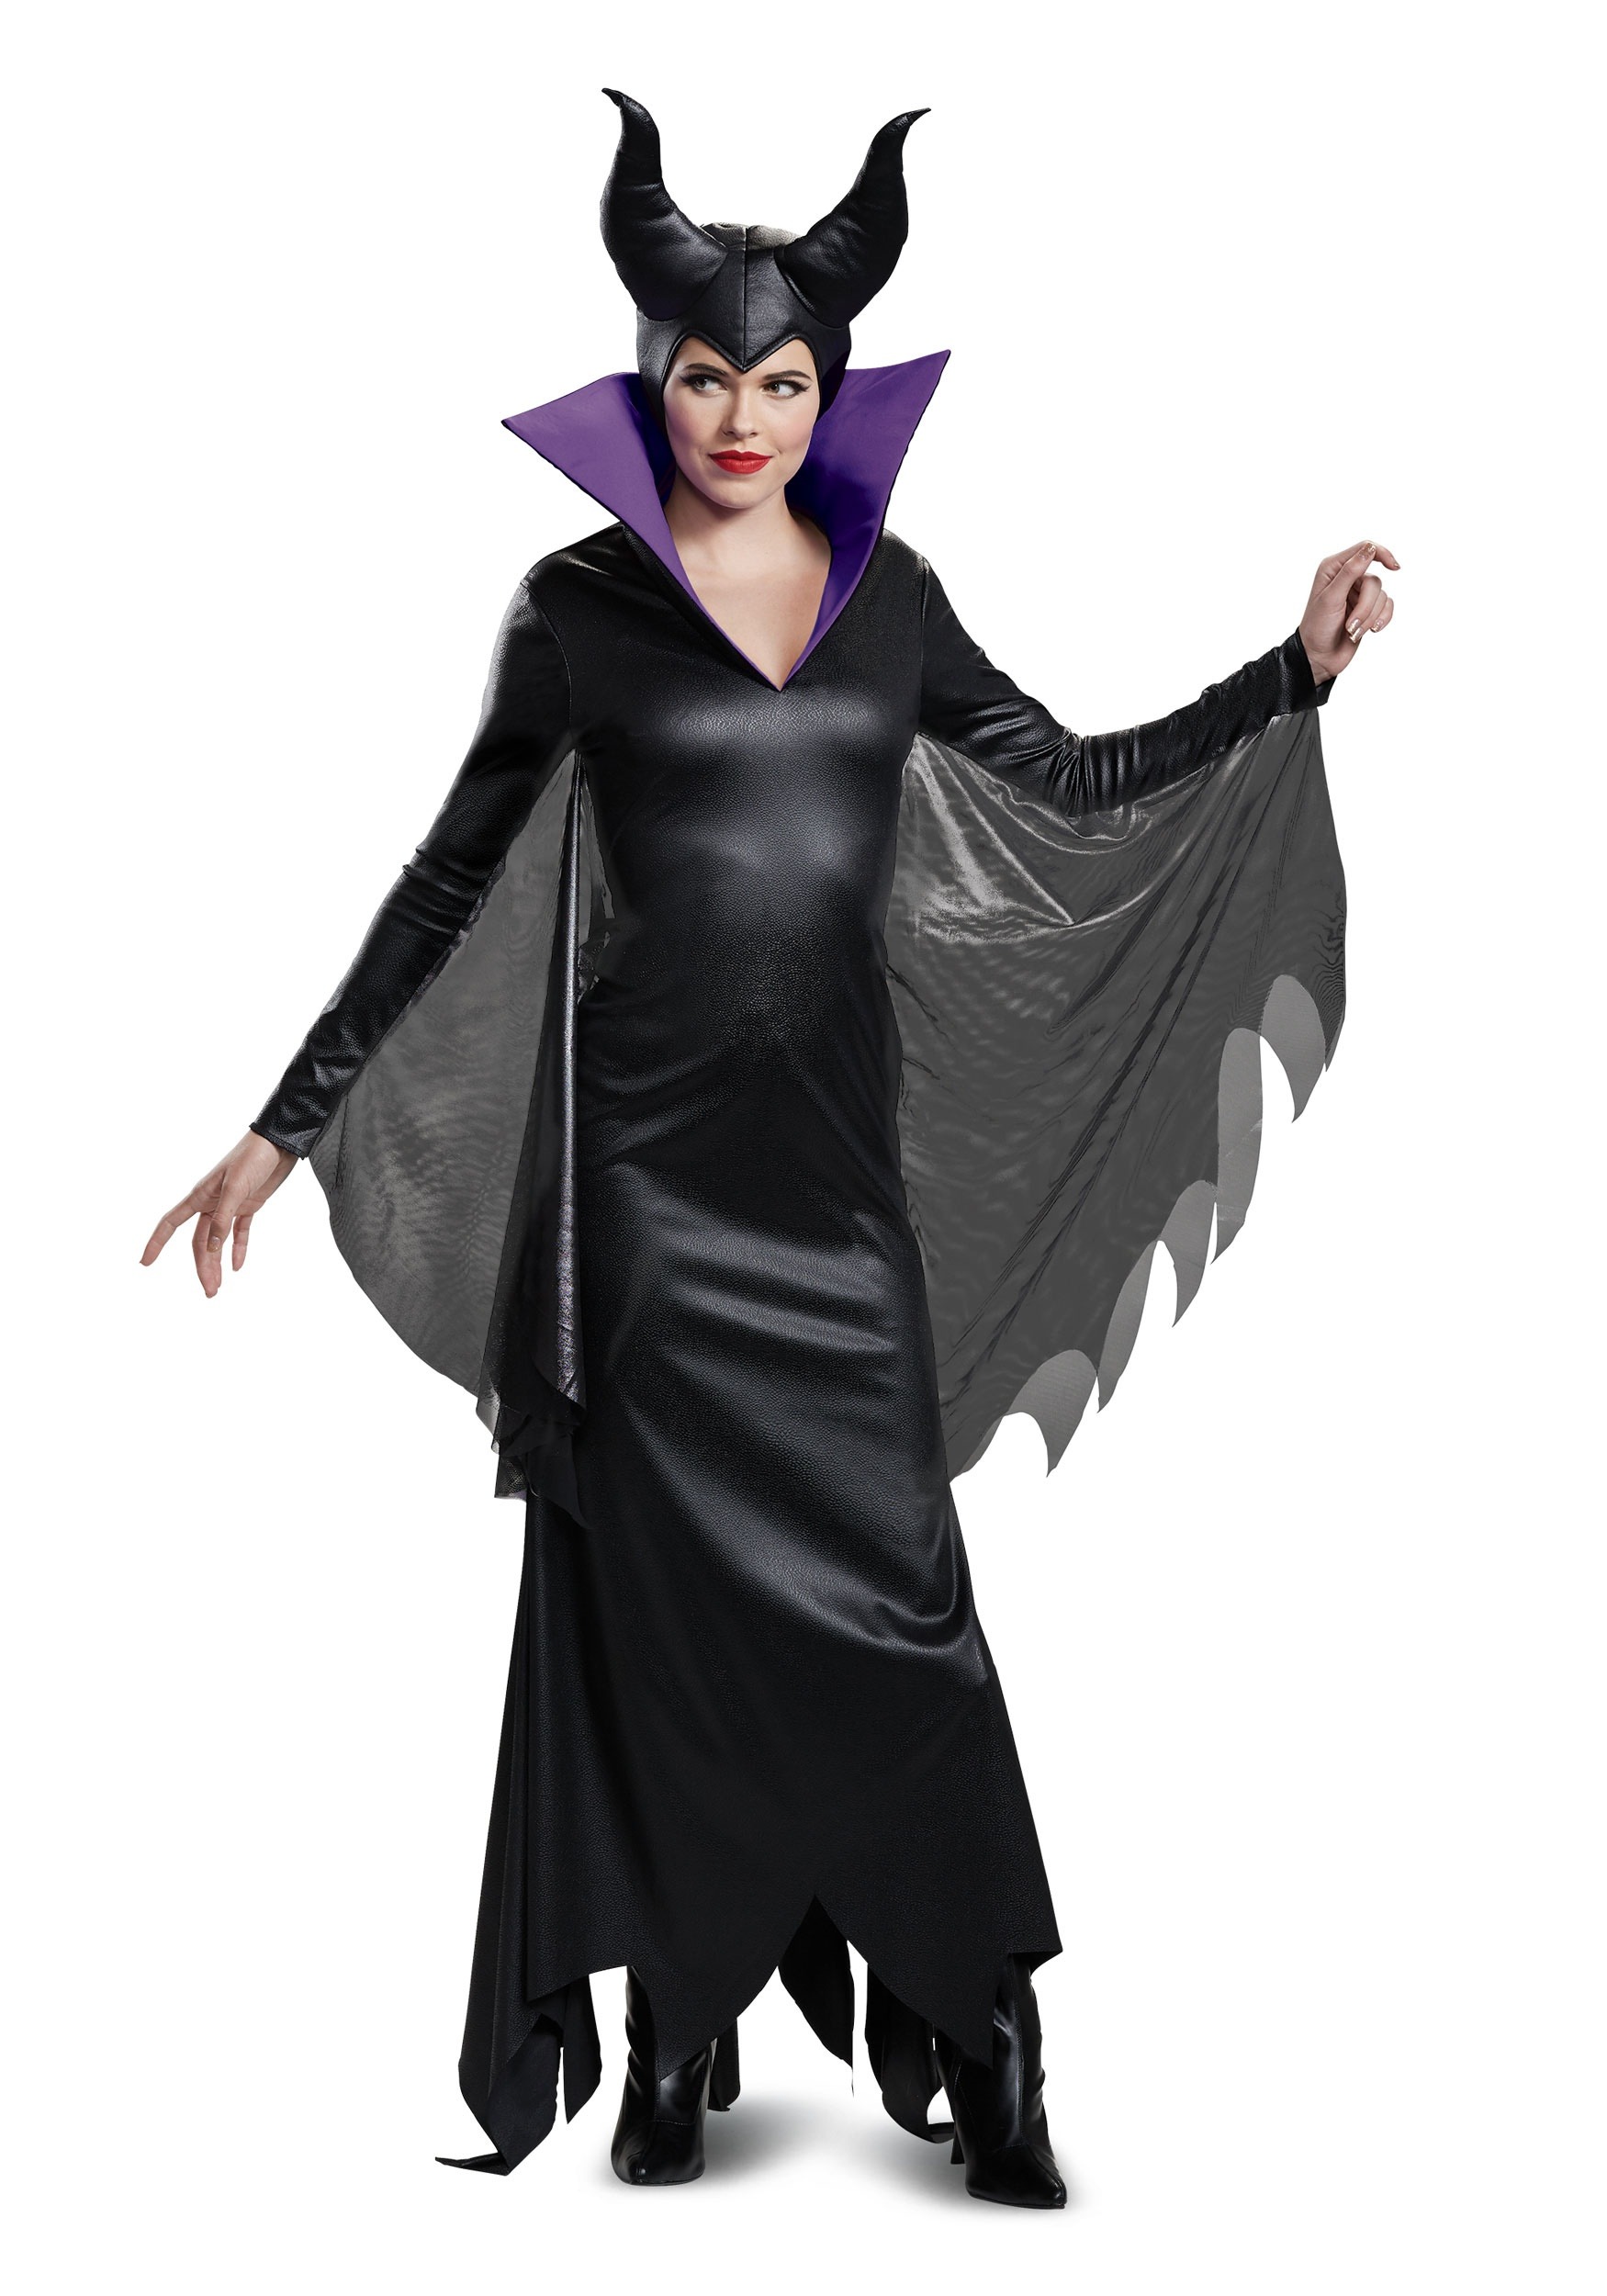 Image of Deluxe Maleficent Adult Costume ID DI67471-S